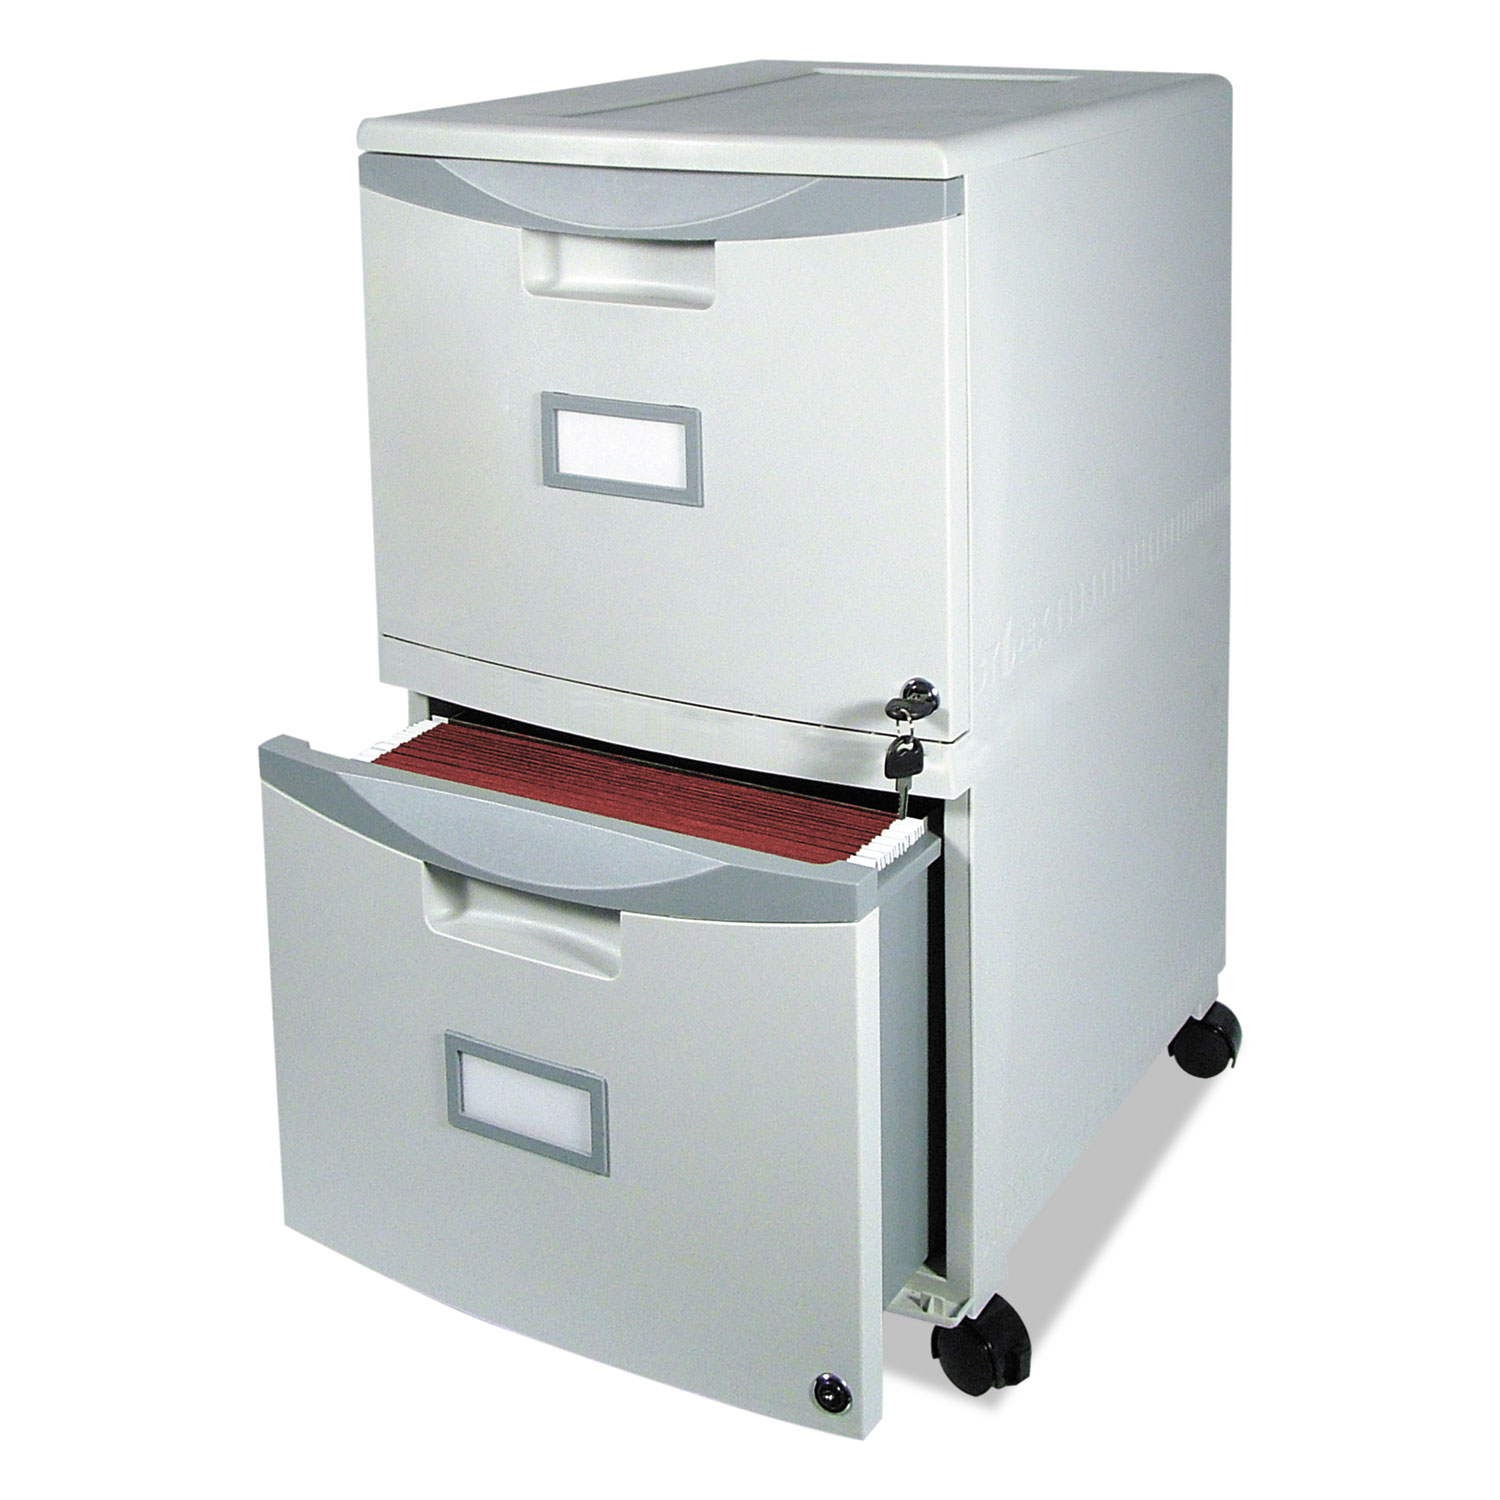 Two-Drawer Mobile Filing Cabinet, 14-3/4w x 18-1/4d x 26h, Gray